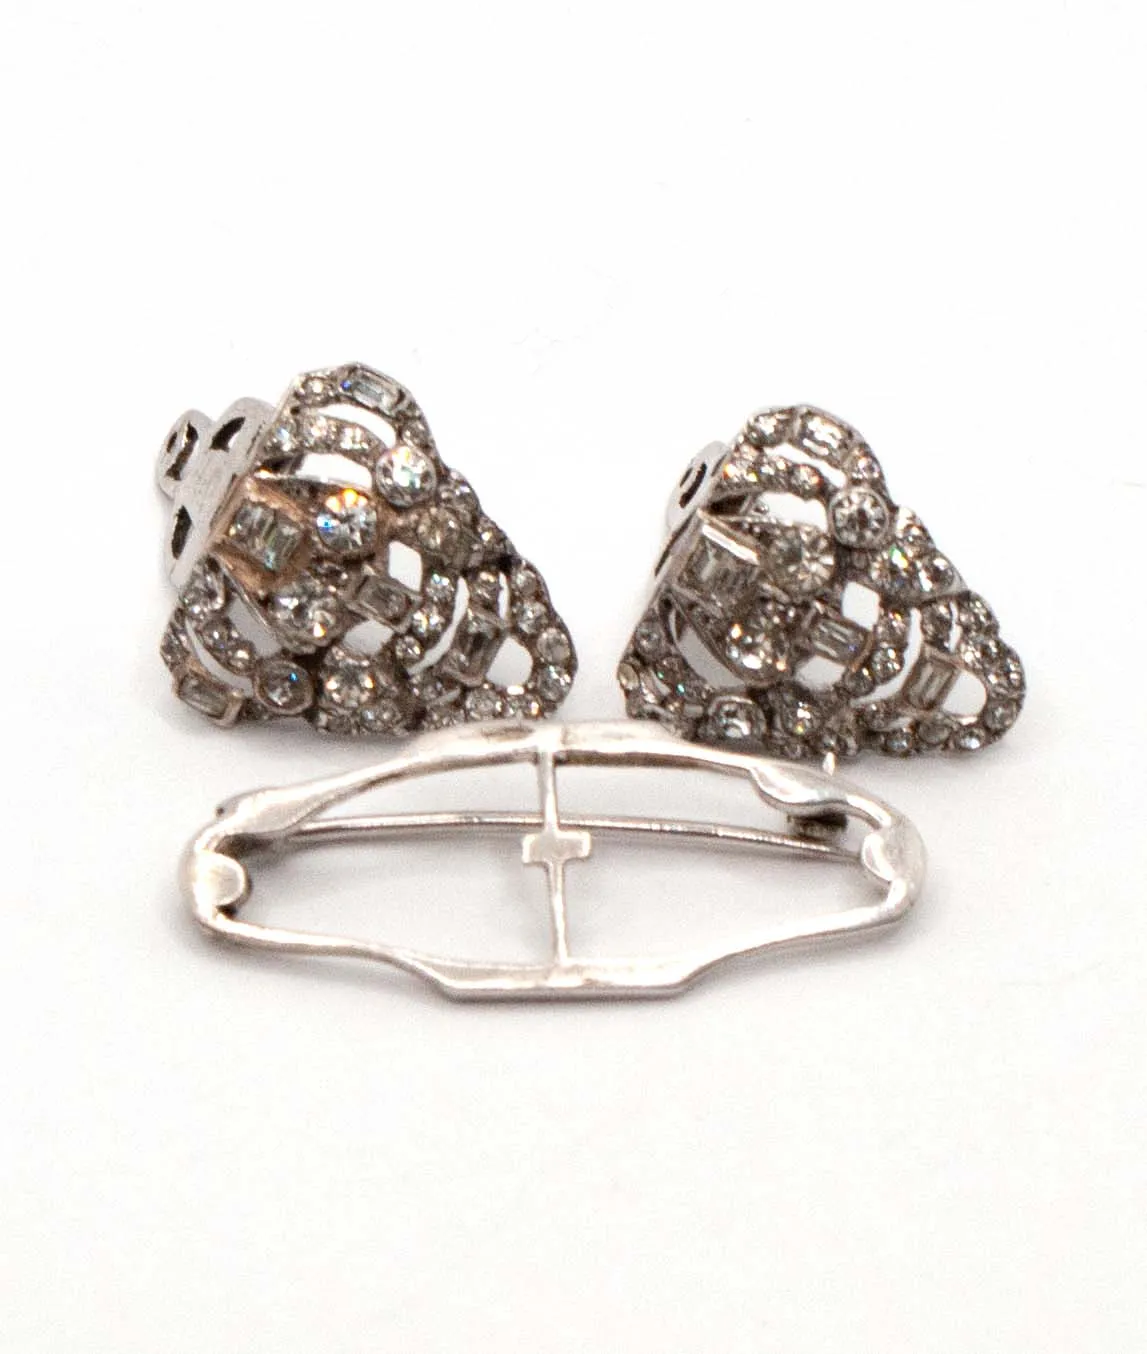 Two shield-shaped dress clips with their brooch frame - all silver with clear crystals